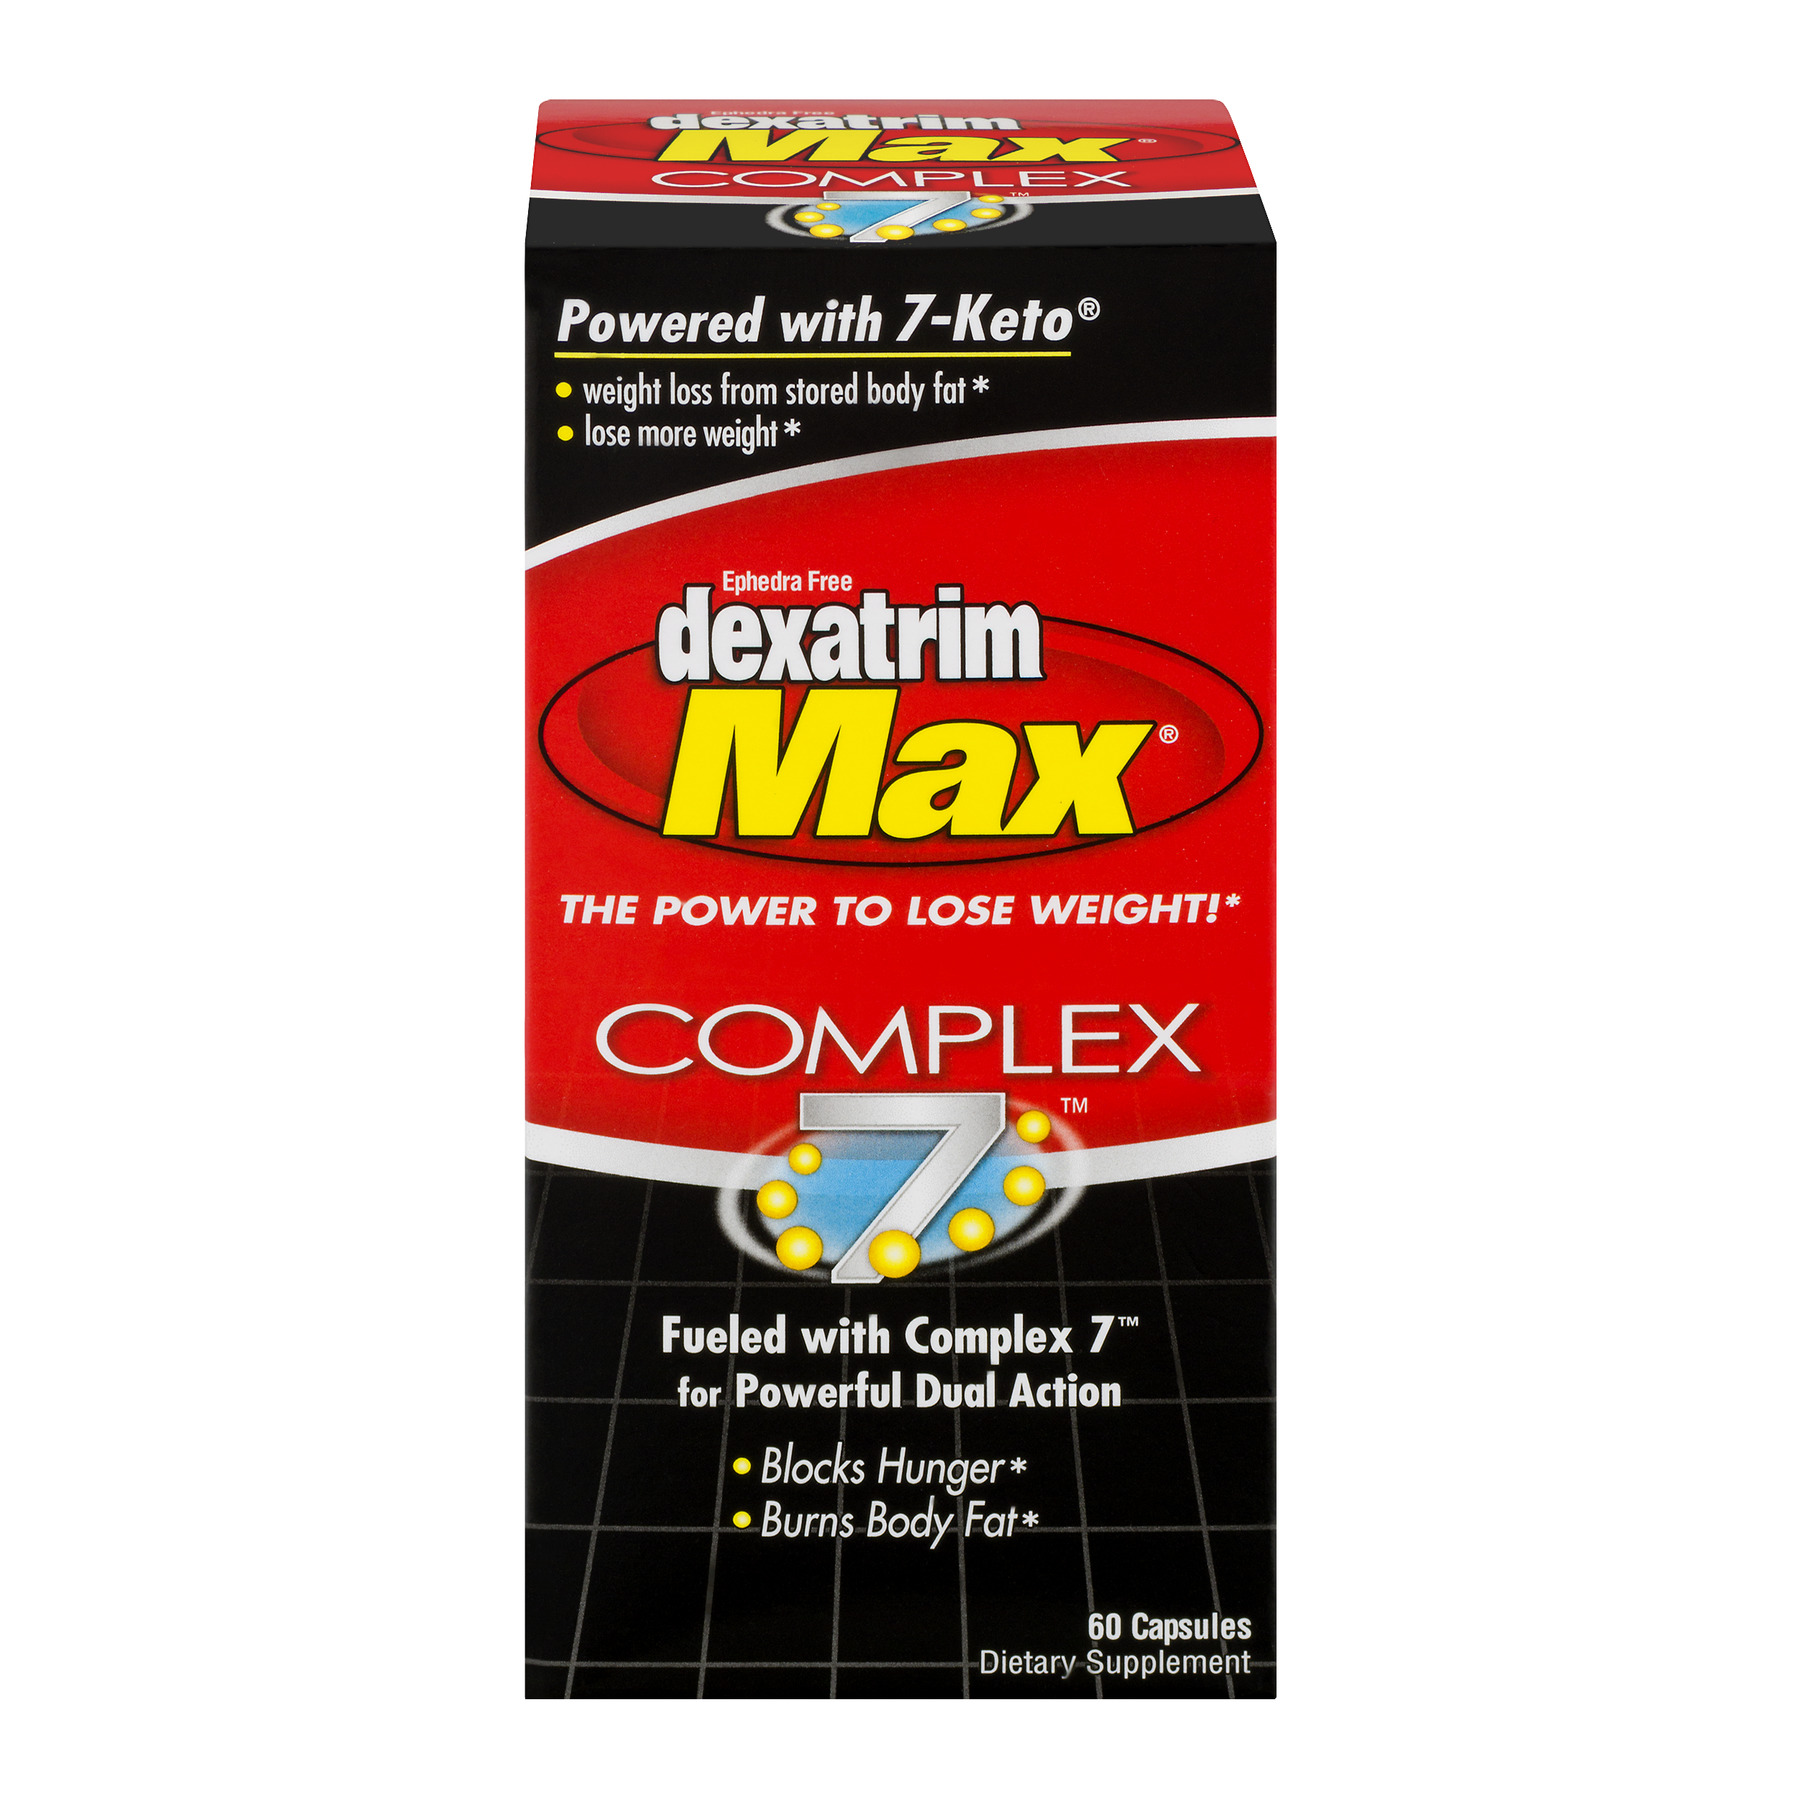 Dexatrim Max Complex Appetite Suppressant Weight Loss Dietary Supplement, Ctules, 60 Ct - image 6 of 7